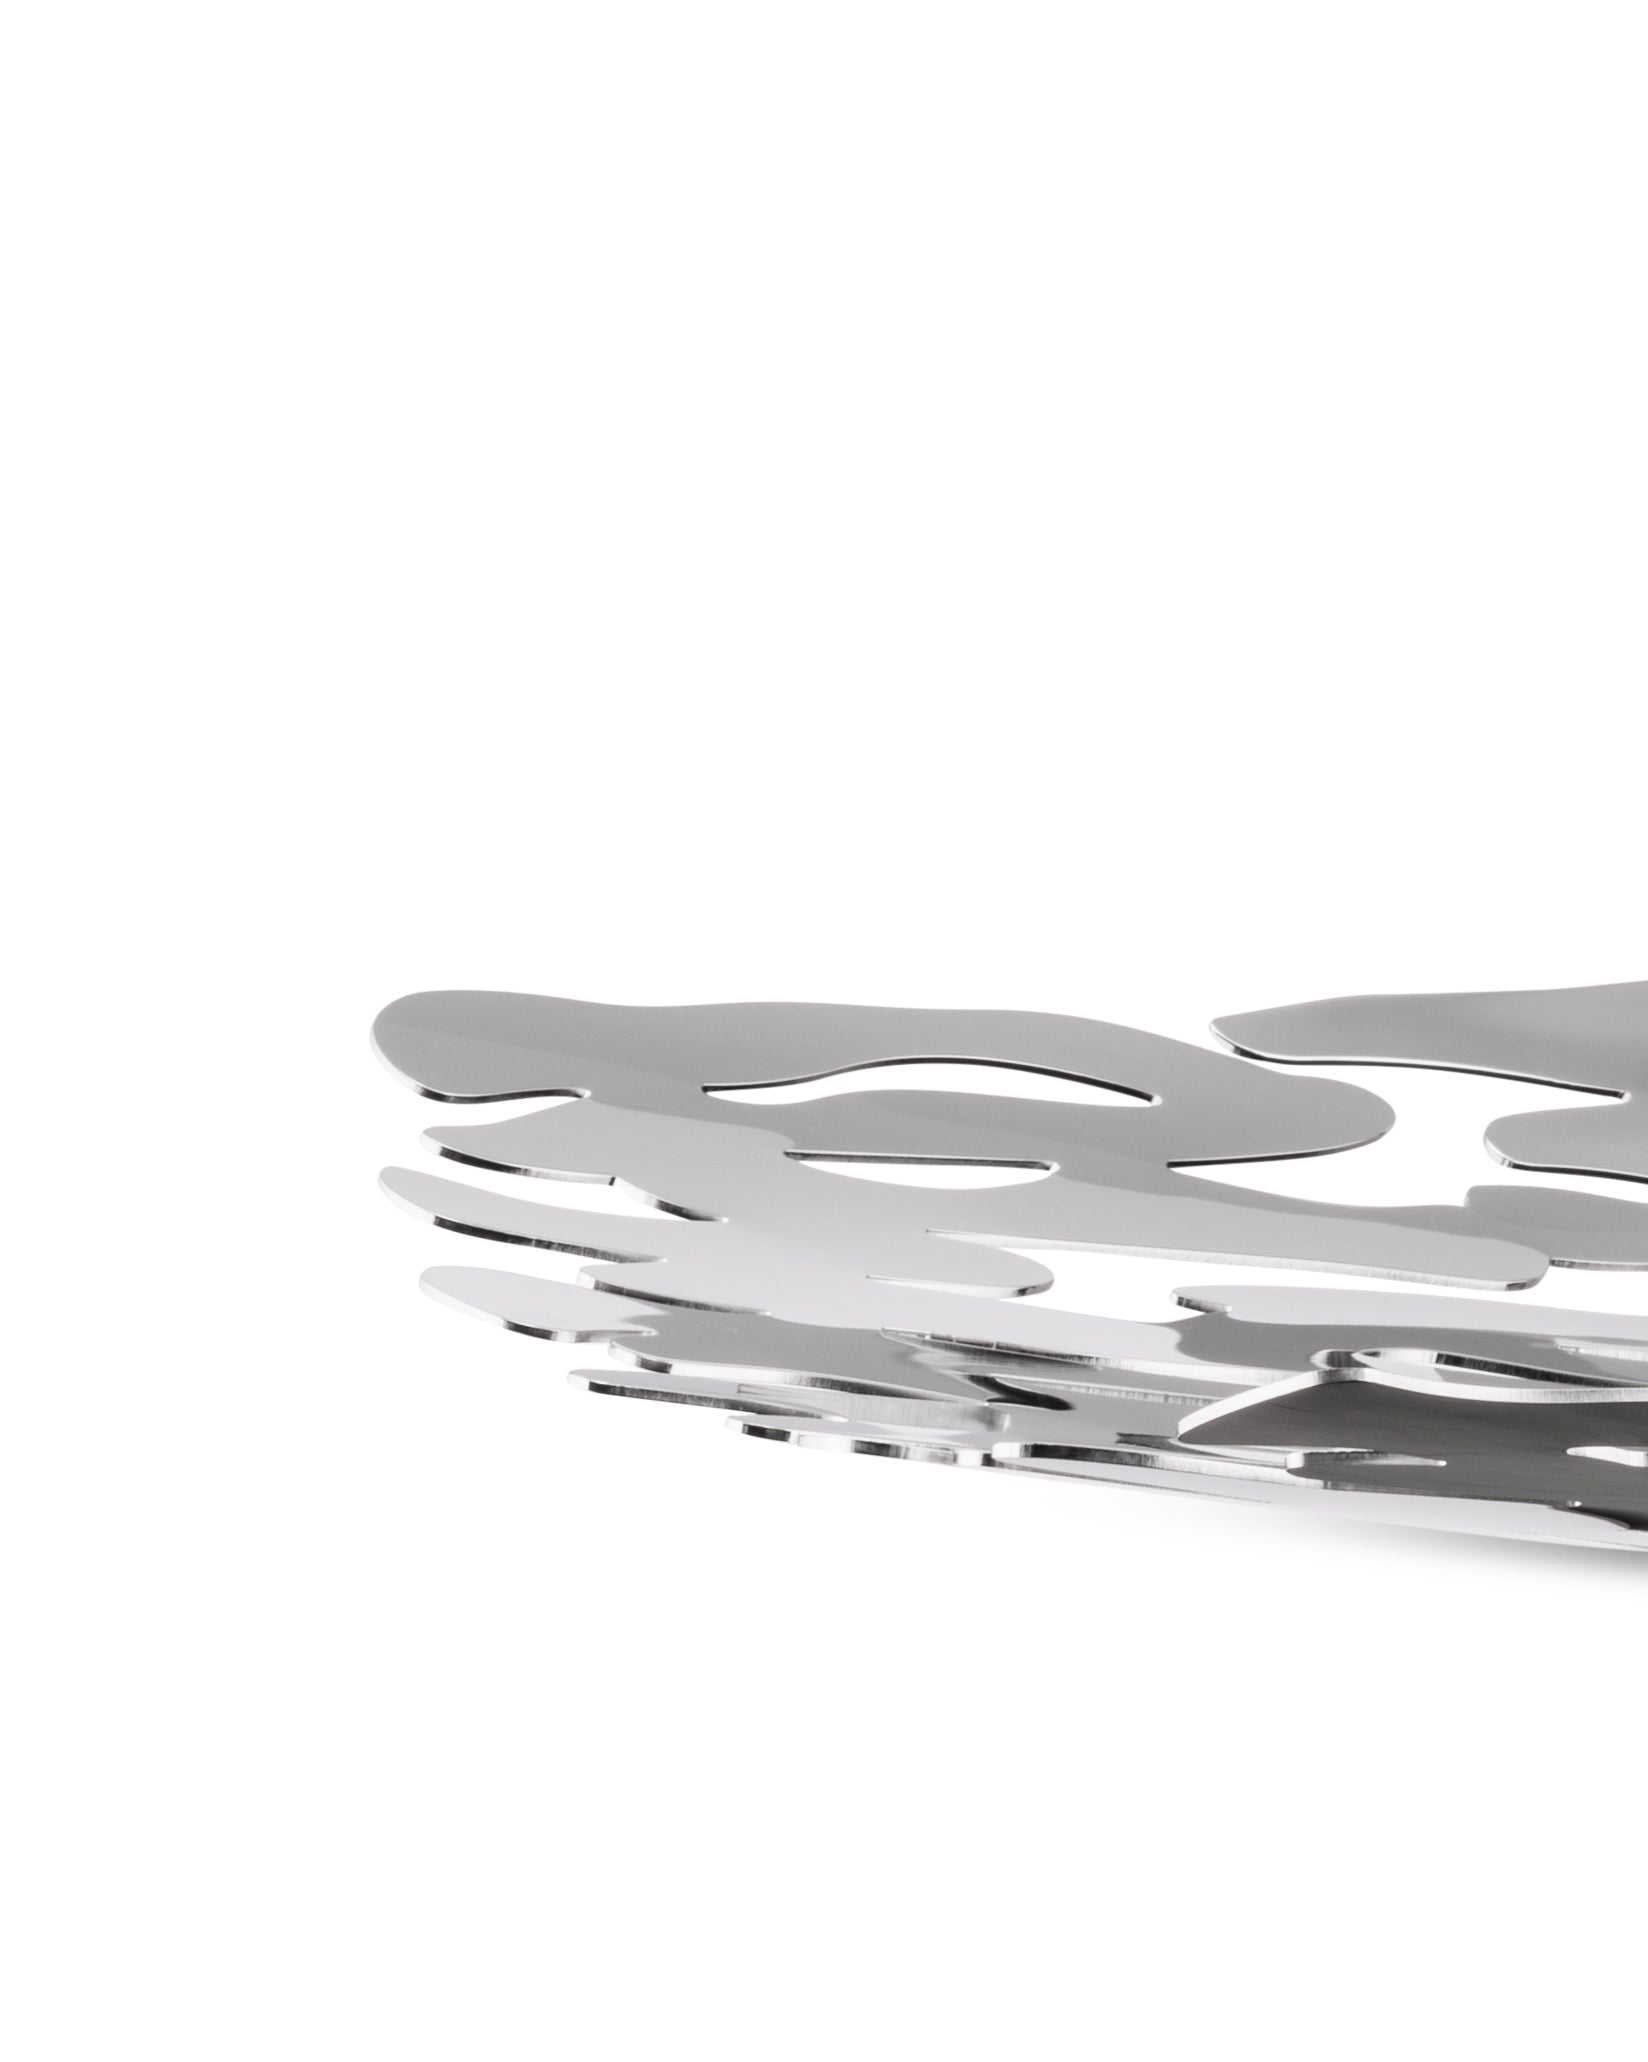 Alessi Bark Centerpiece in 18/10 Stainless Steel, Polished Finish